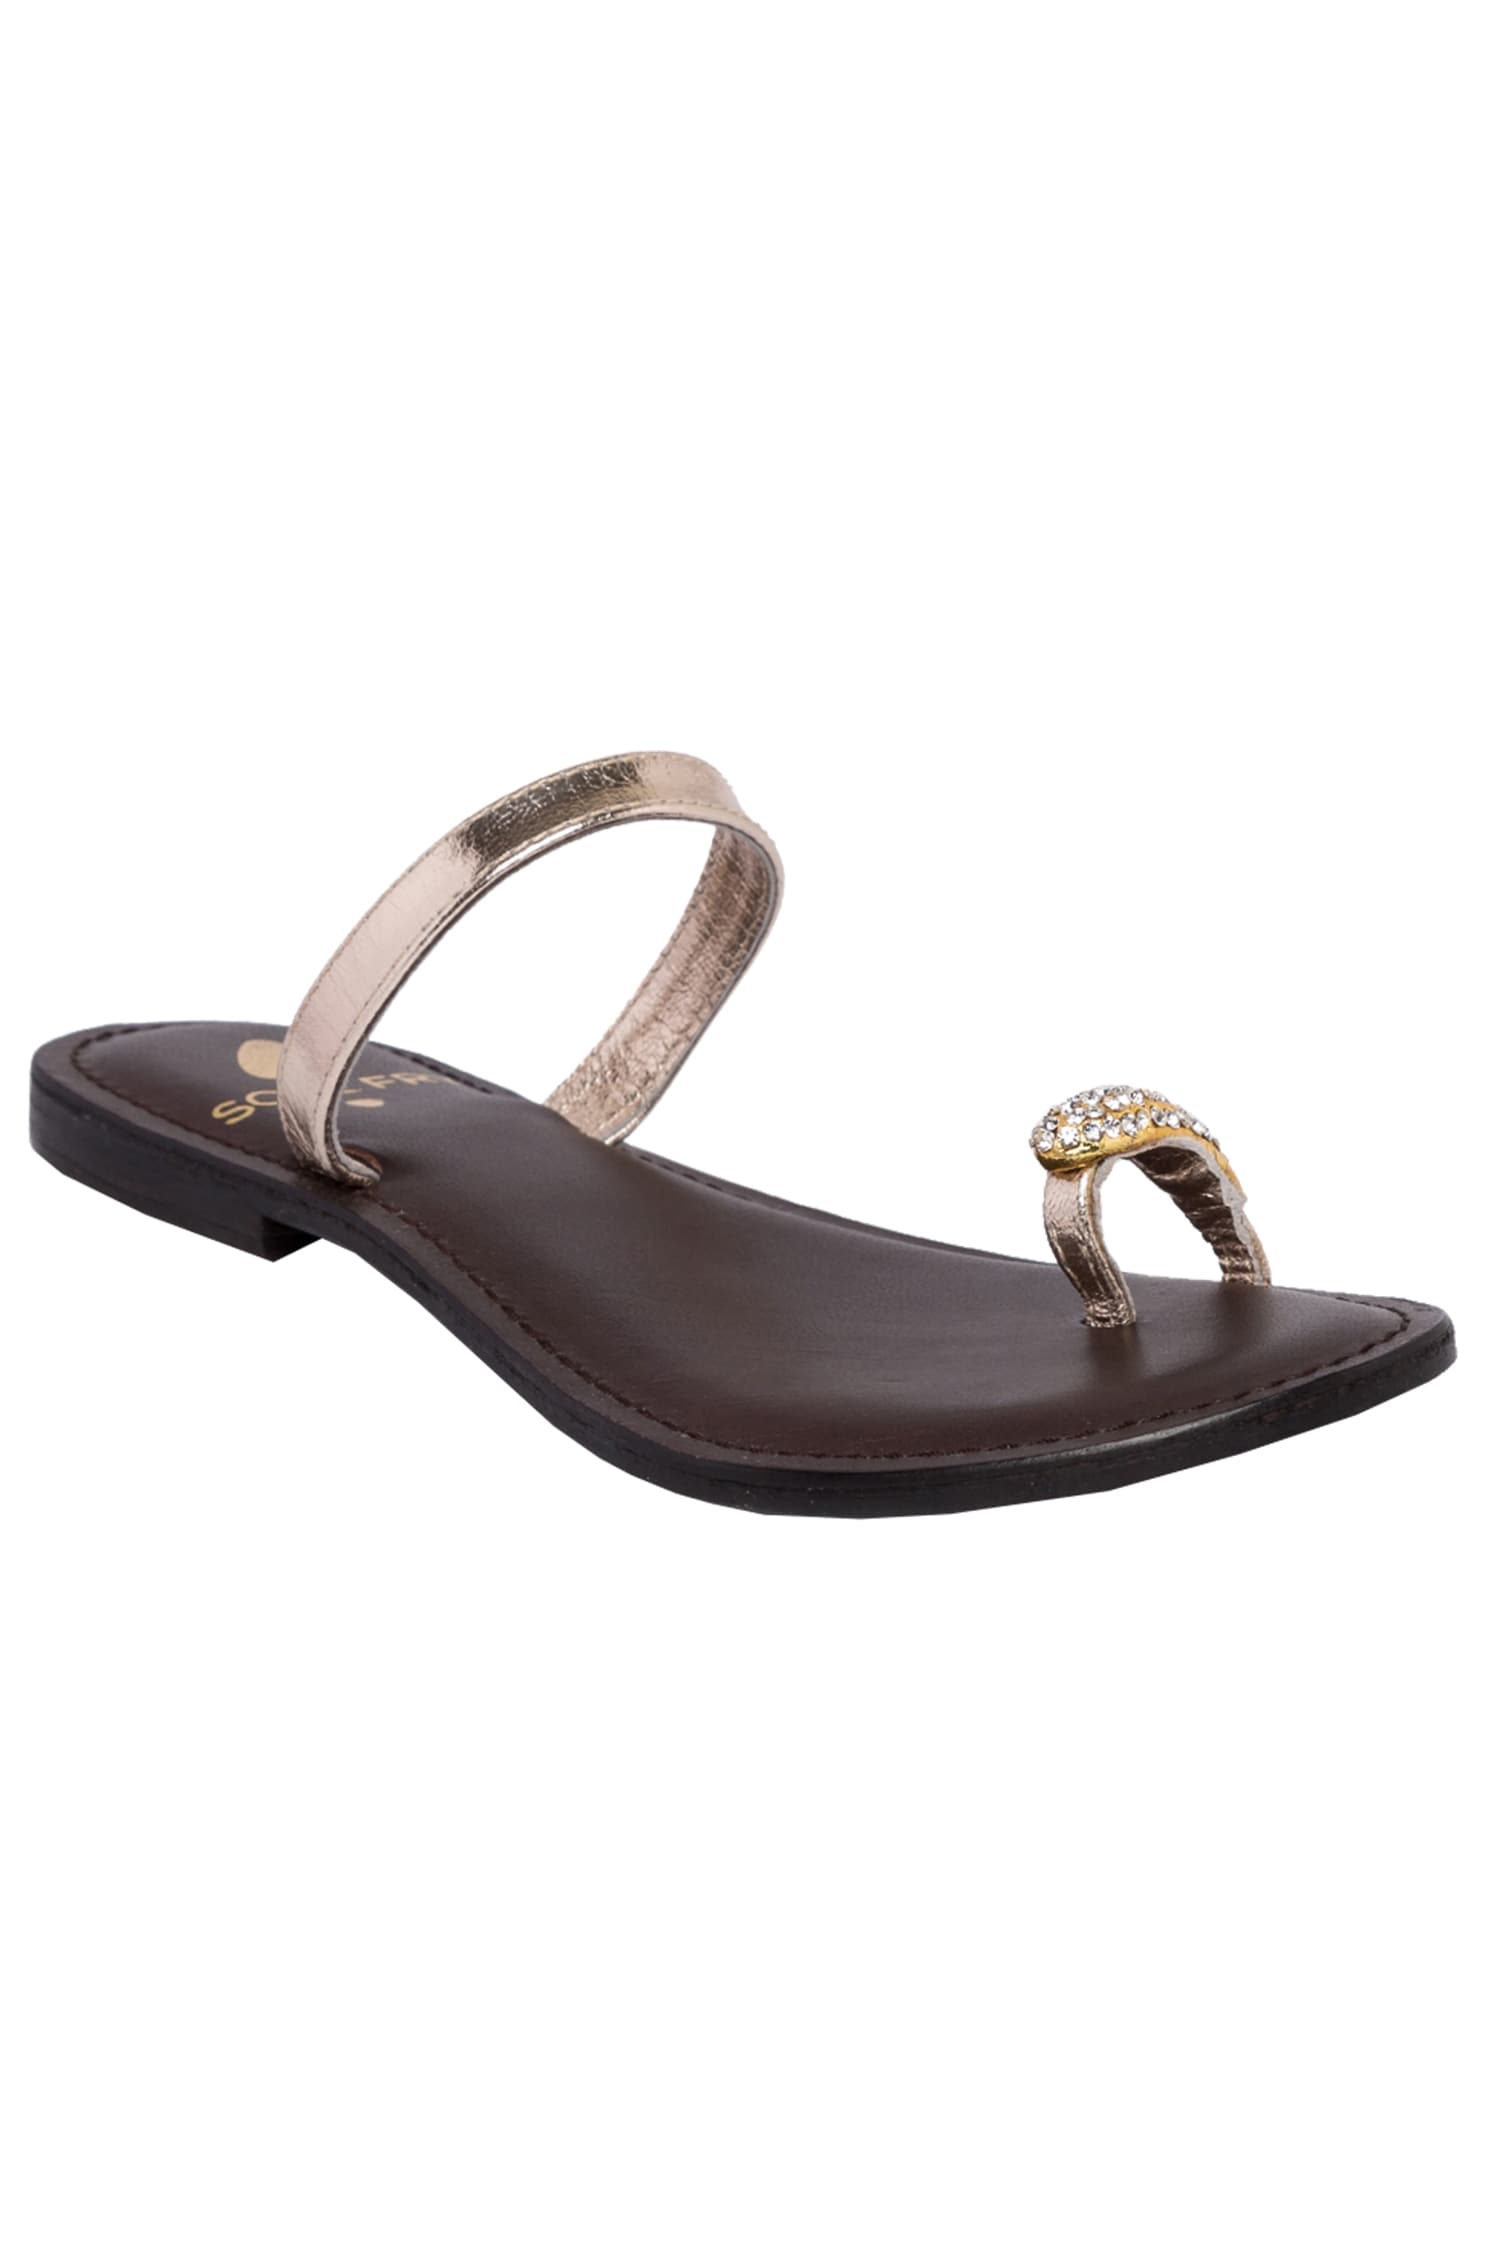 Buy Gold Toe Ring Flat Sandals by Sole Fry Online at Aza Fashions.